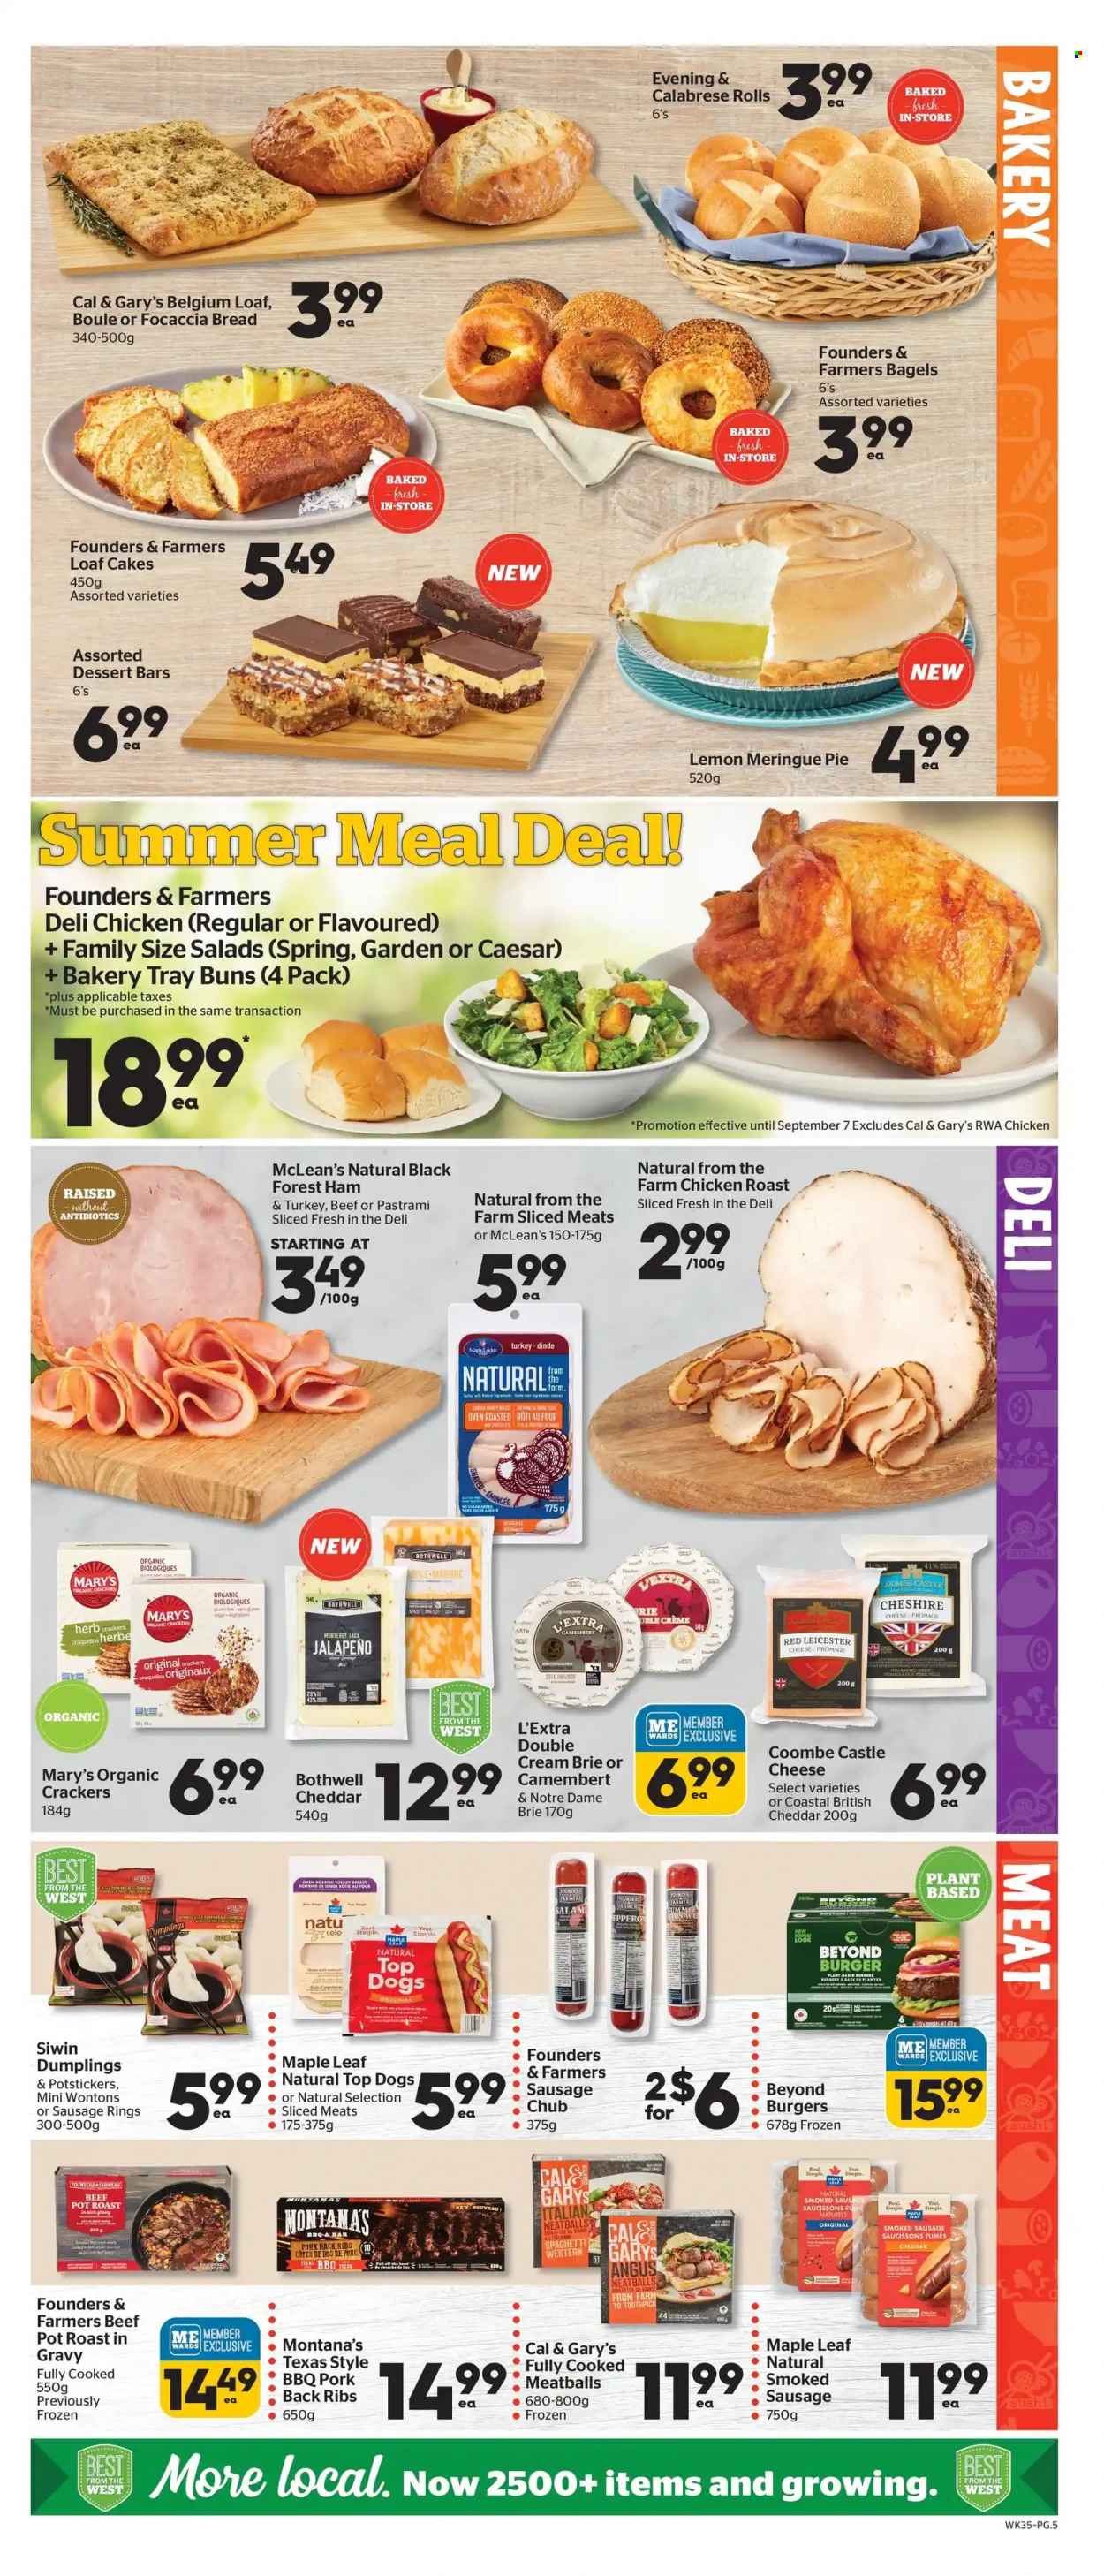 thumbnail - Calgary Co-op Flyer - June 30, 2022 - July 06, 2022 - Sales products - bagels, bread, cake, pie, buns, focaccia, jalapeño, spaghetti, chicken roast, meatballs, hamburger, dumplings, ham, pastrami, sausage, smoked sausage, summer sausage, Monterey Jack cheese, Red Leicester, cheddar, Cheshire cheese, cheese, brie, crackers, herbs, Castle, beef meat, pork meat, pork ribs, pork back ribs, camembert. Page 6.